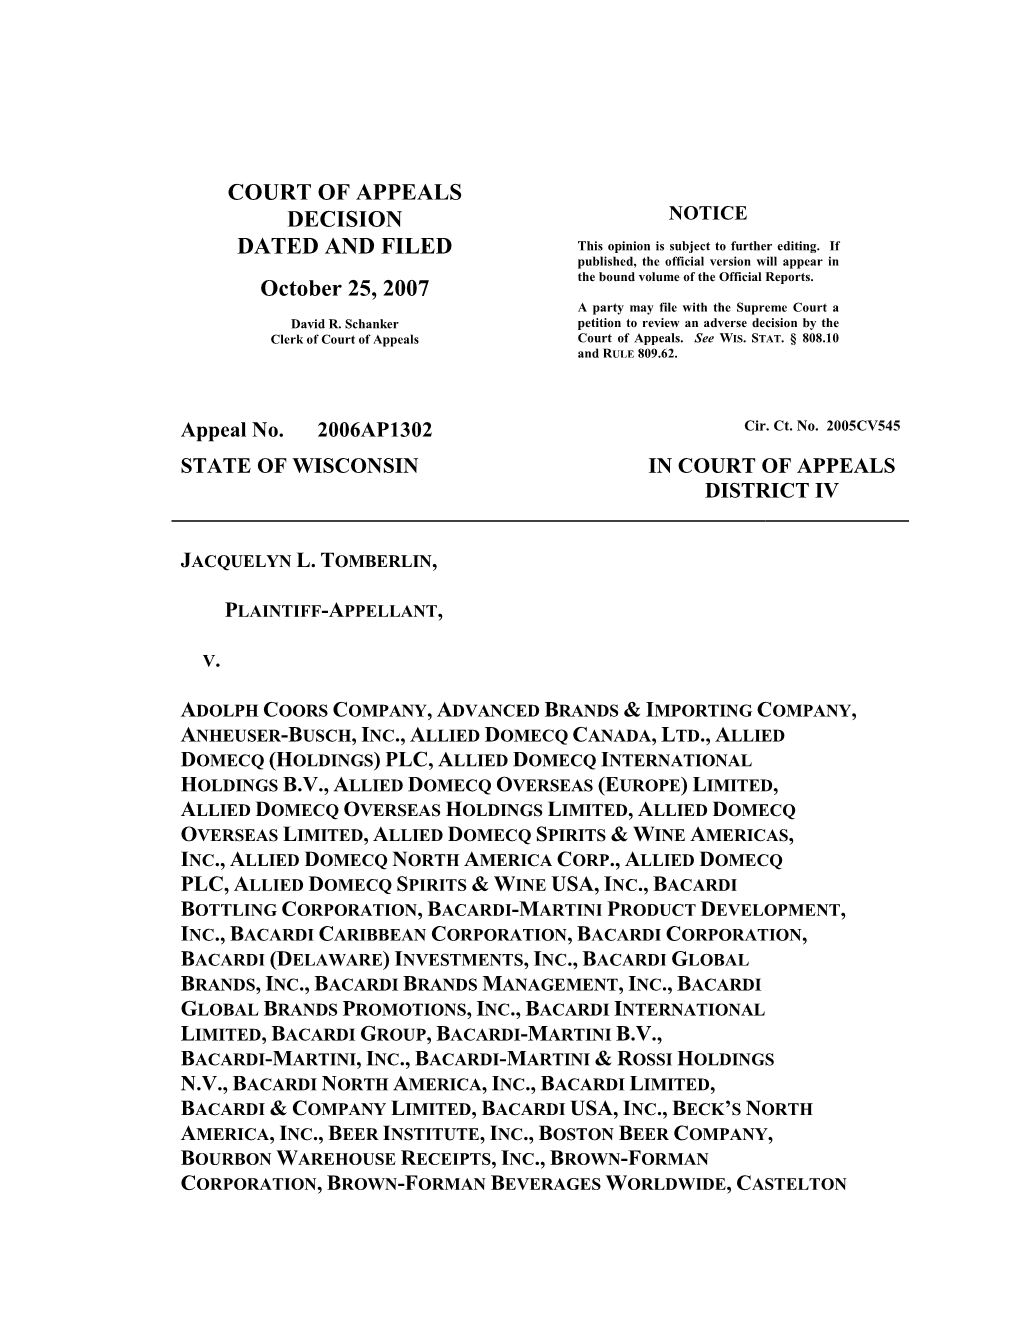 COURT of APPEALS DECISION DATED and FILED October 25, 2007